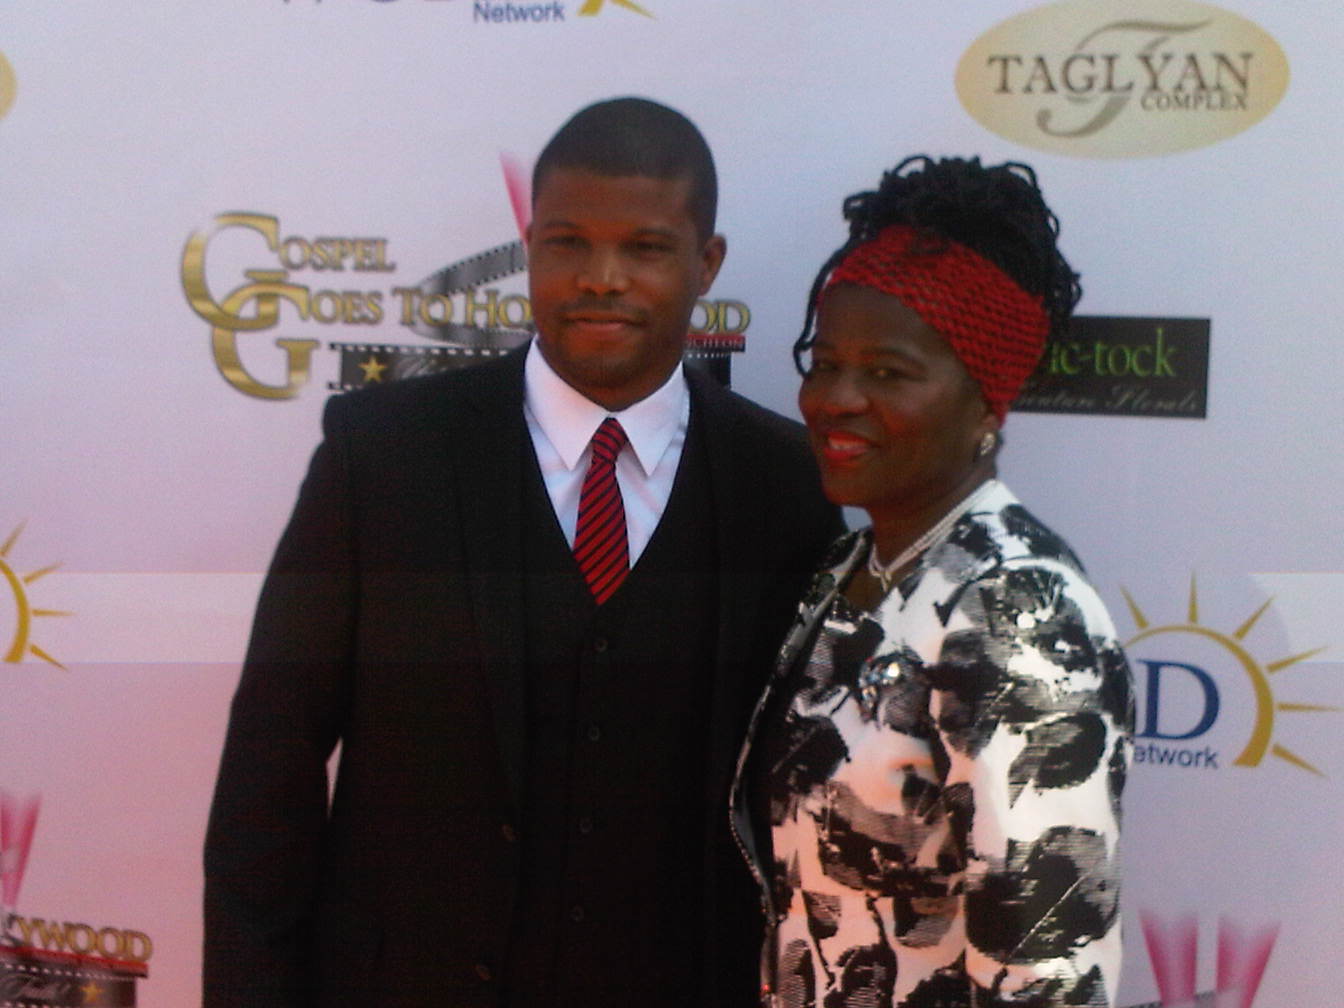 Sharif Atkins with his lovely mother, Rev. Jacqueline Atkins, J.D. at the 